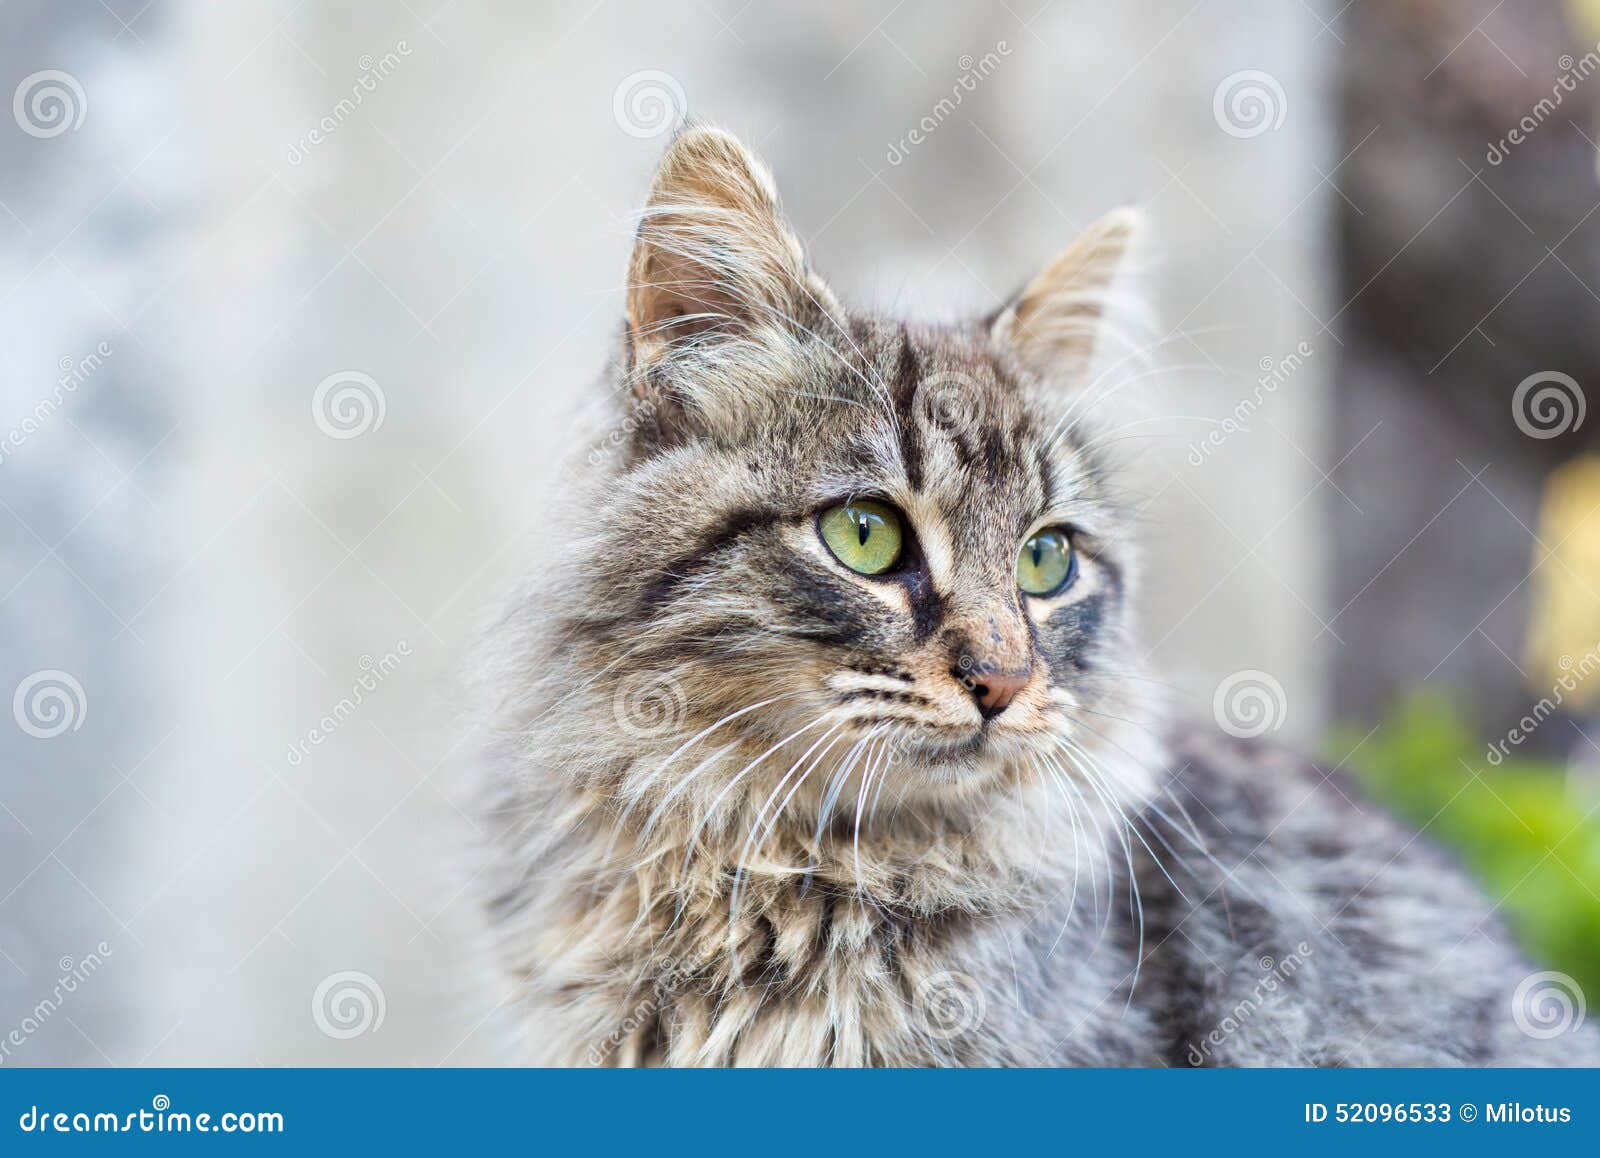 1,675 Beautiful Tabby Cat Long Fur Green Eyes Stock Photos - Free &  Royalty-Free Stock Photos from Dreamstime